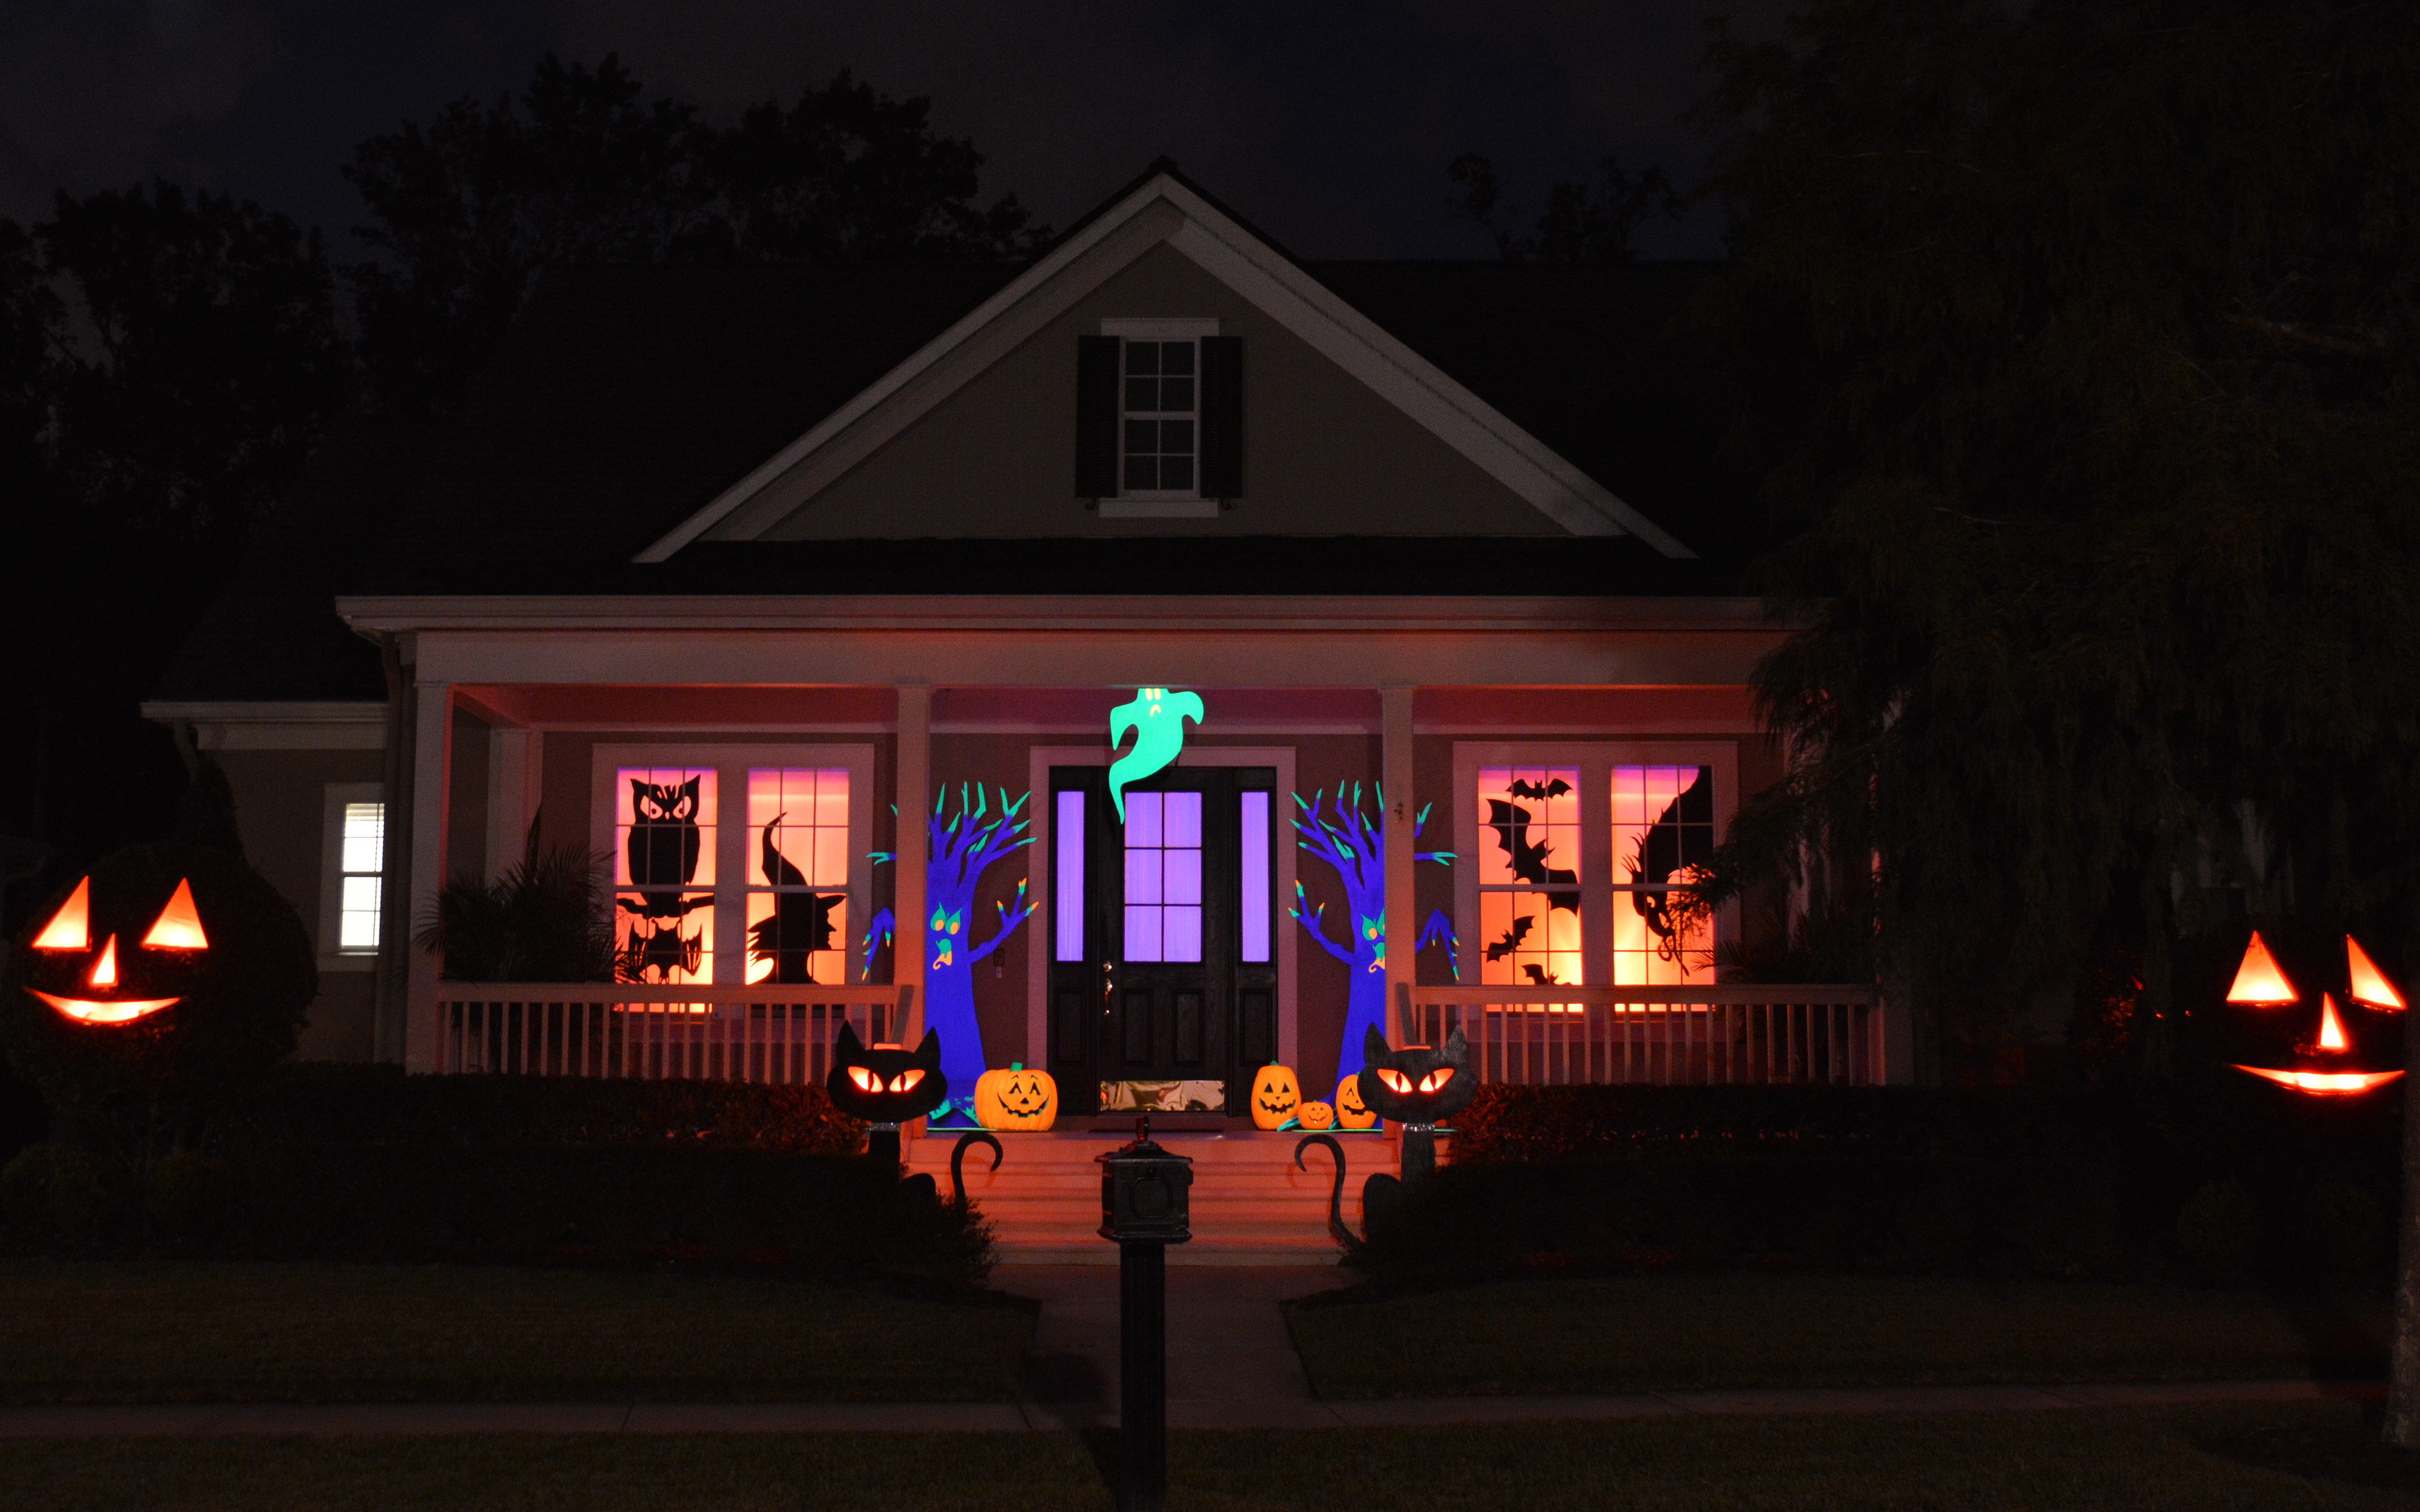 ★ How to light up house for halloween